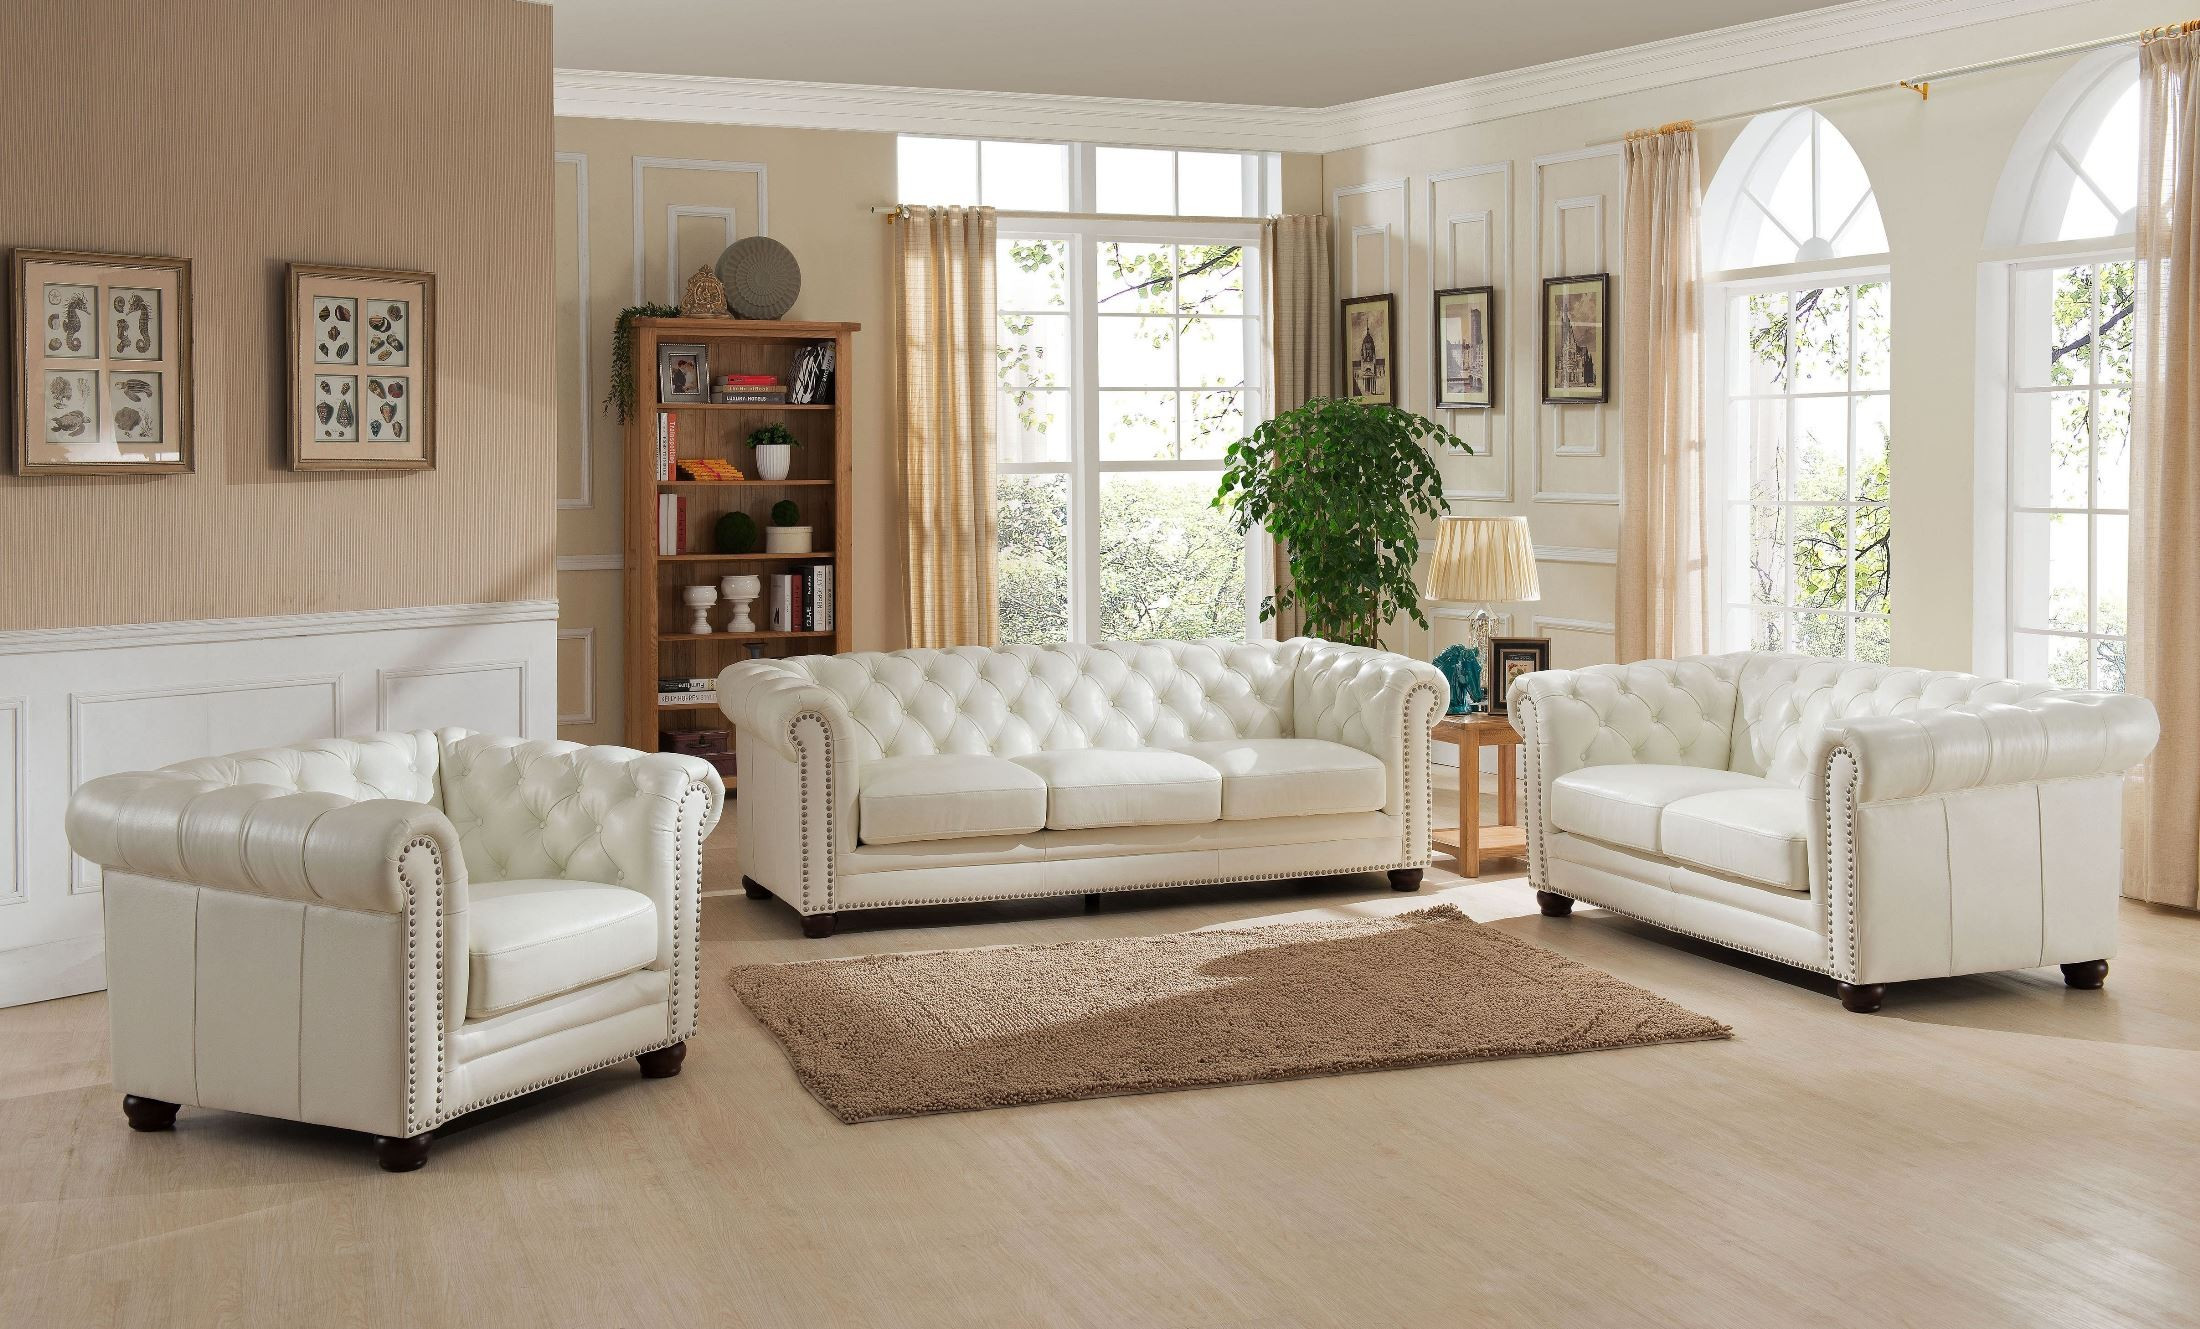 Living Room Chair Set
 Monaco Pearl White Leather Living Room Set from Amax